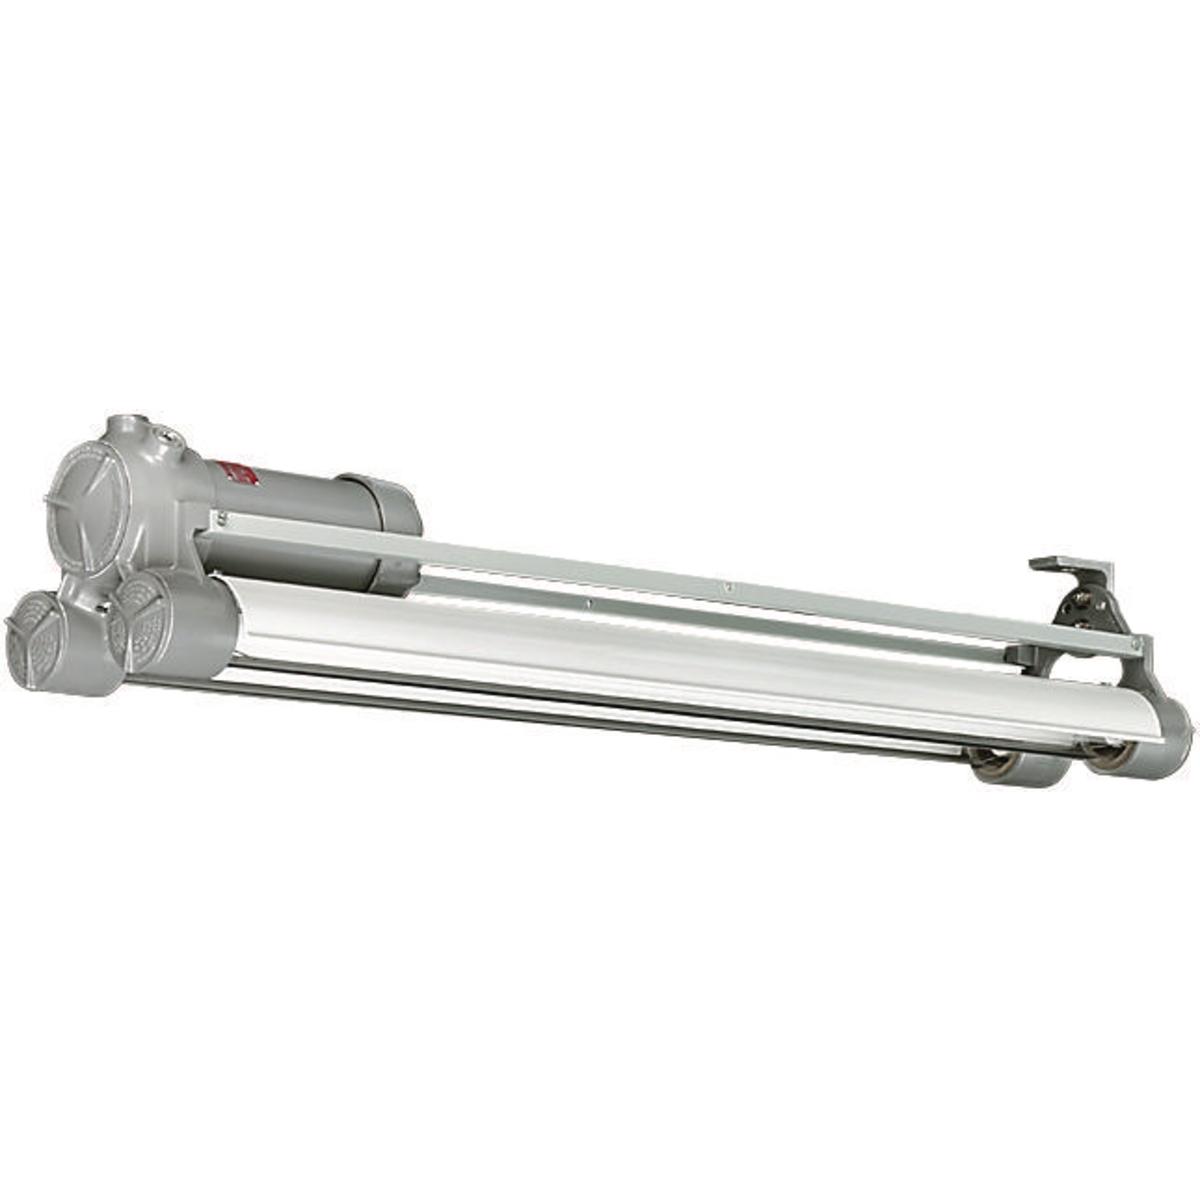 Hubbell HFX-55T-304 HFX 55W 120/277V 4 Foot, 4 Lamp- Biaxial  ; UL Listed and labeled for use inside paint spray booths and rooms ; 2’ nominal compact models facilitate use in areas too small for nominal 4’ models, or where the light must be confined ; Standard ballast is 12